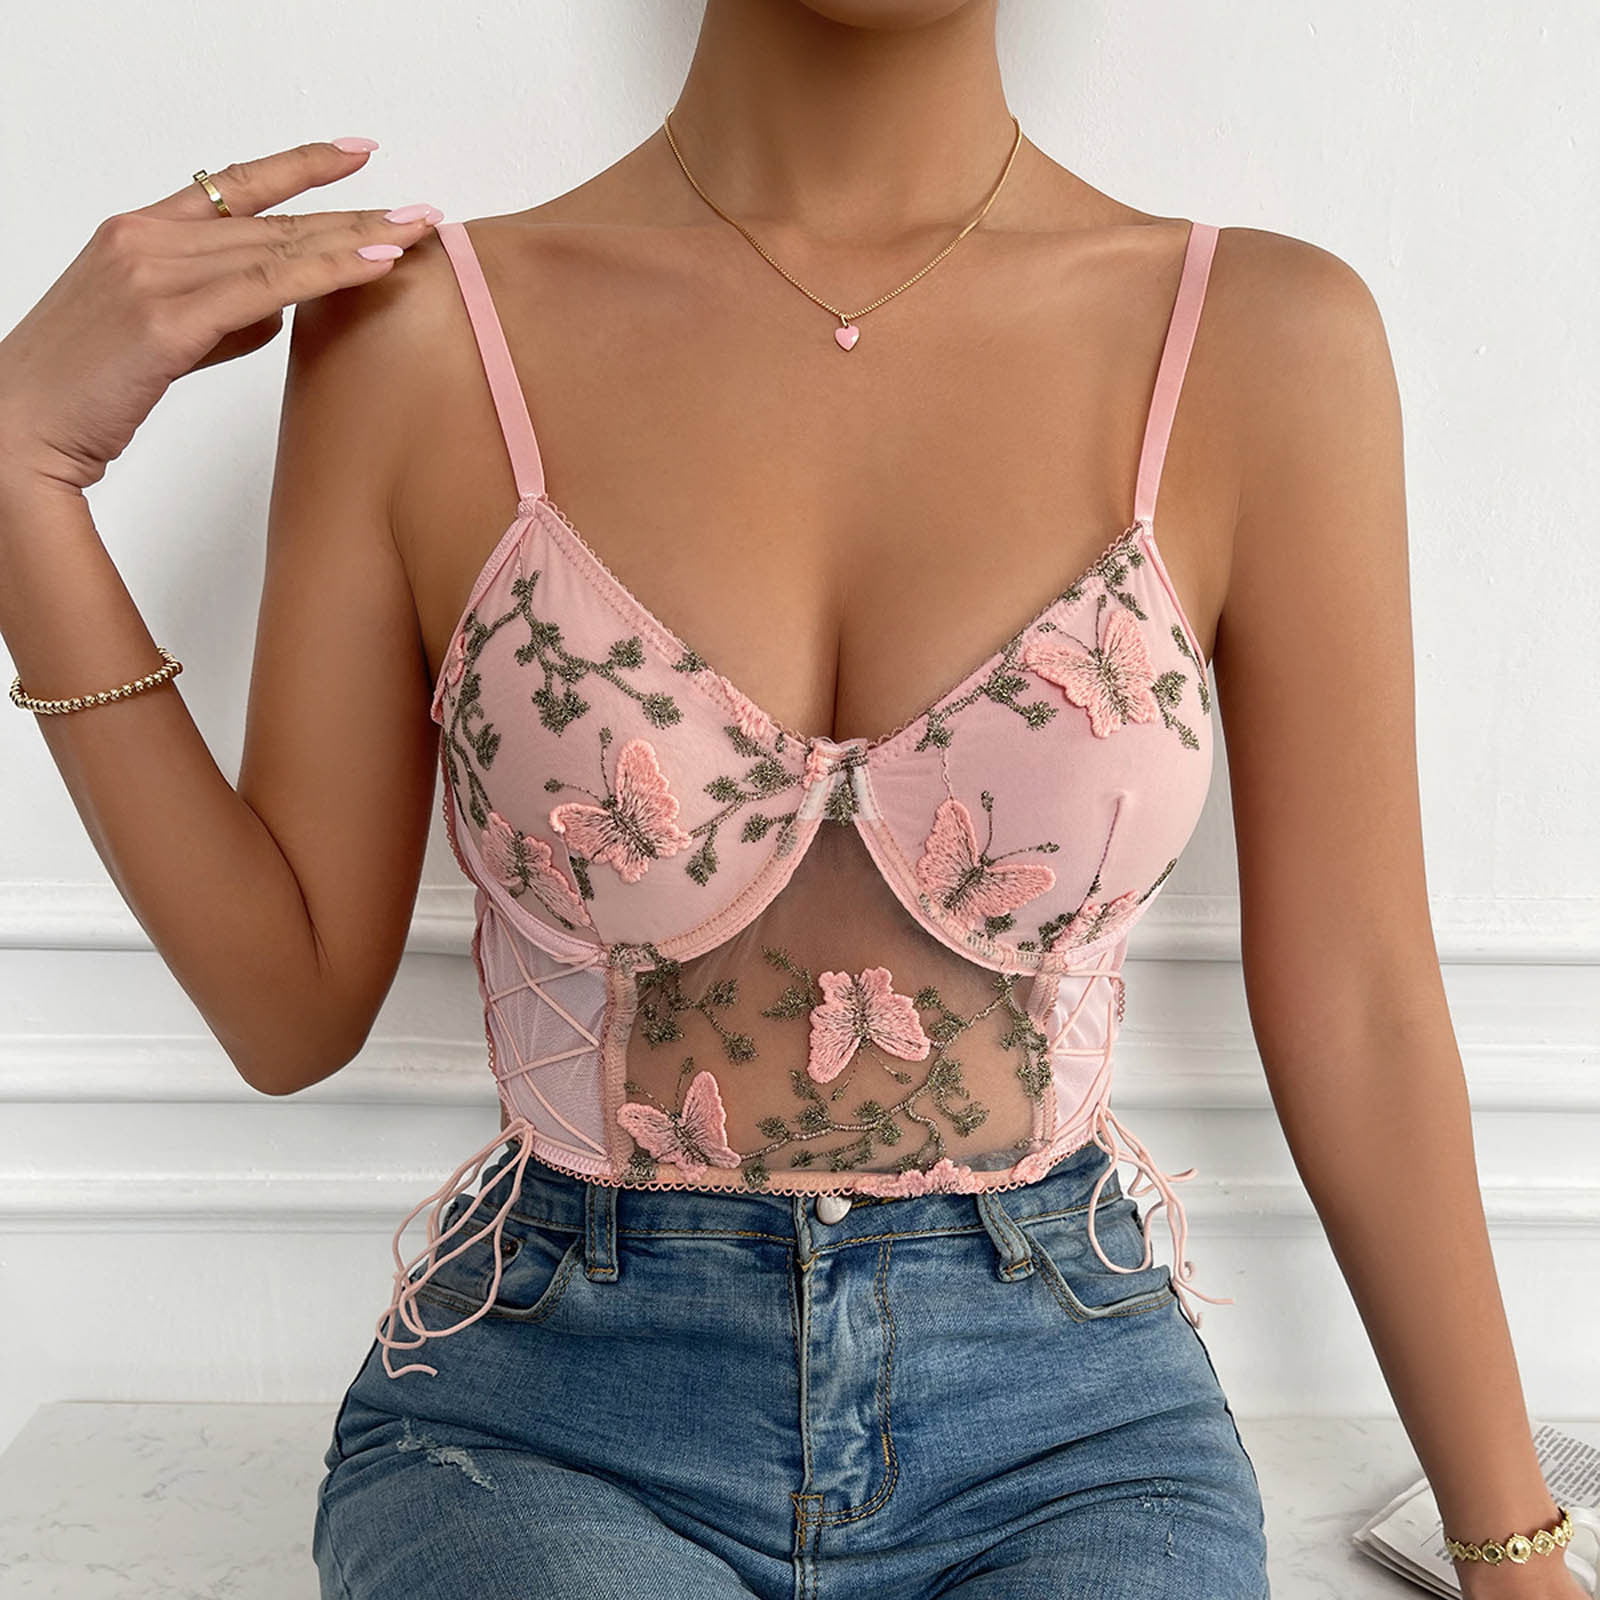 WQJNWEQ Clearance Bralette Plus Size Sexy Push Up Bras Lace Ladies